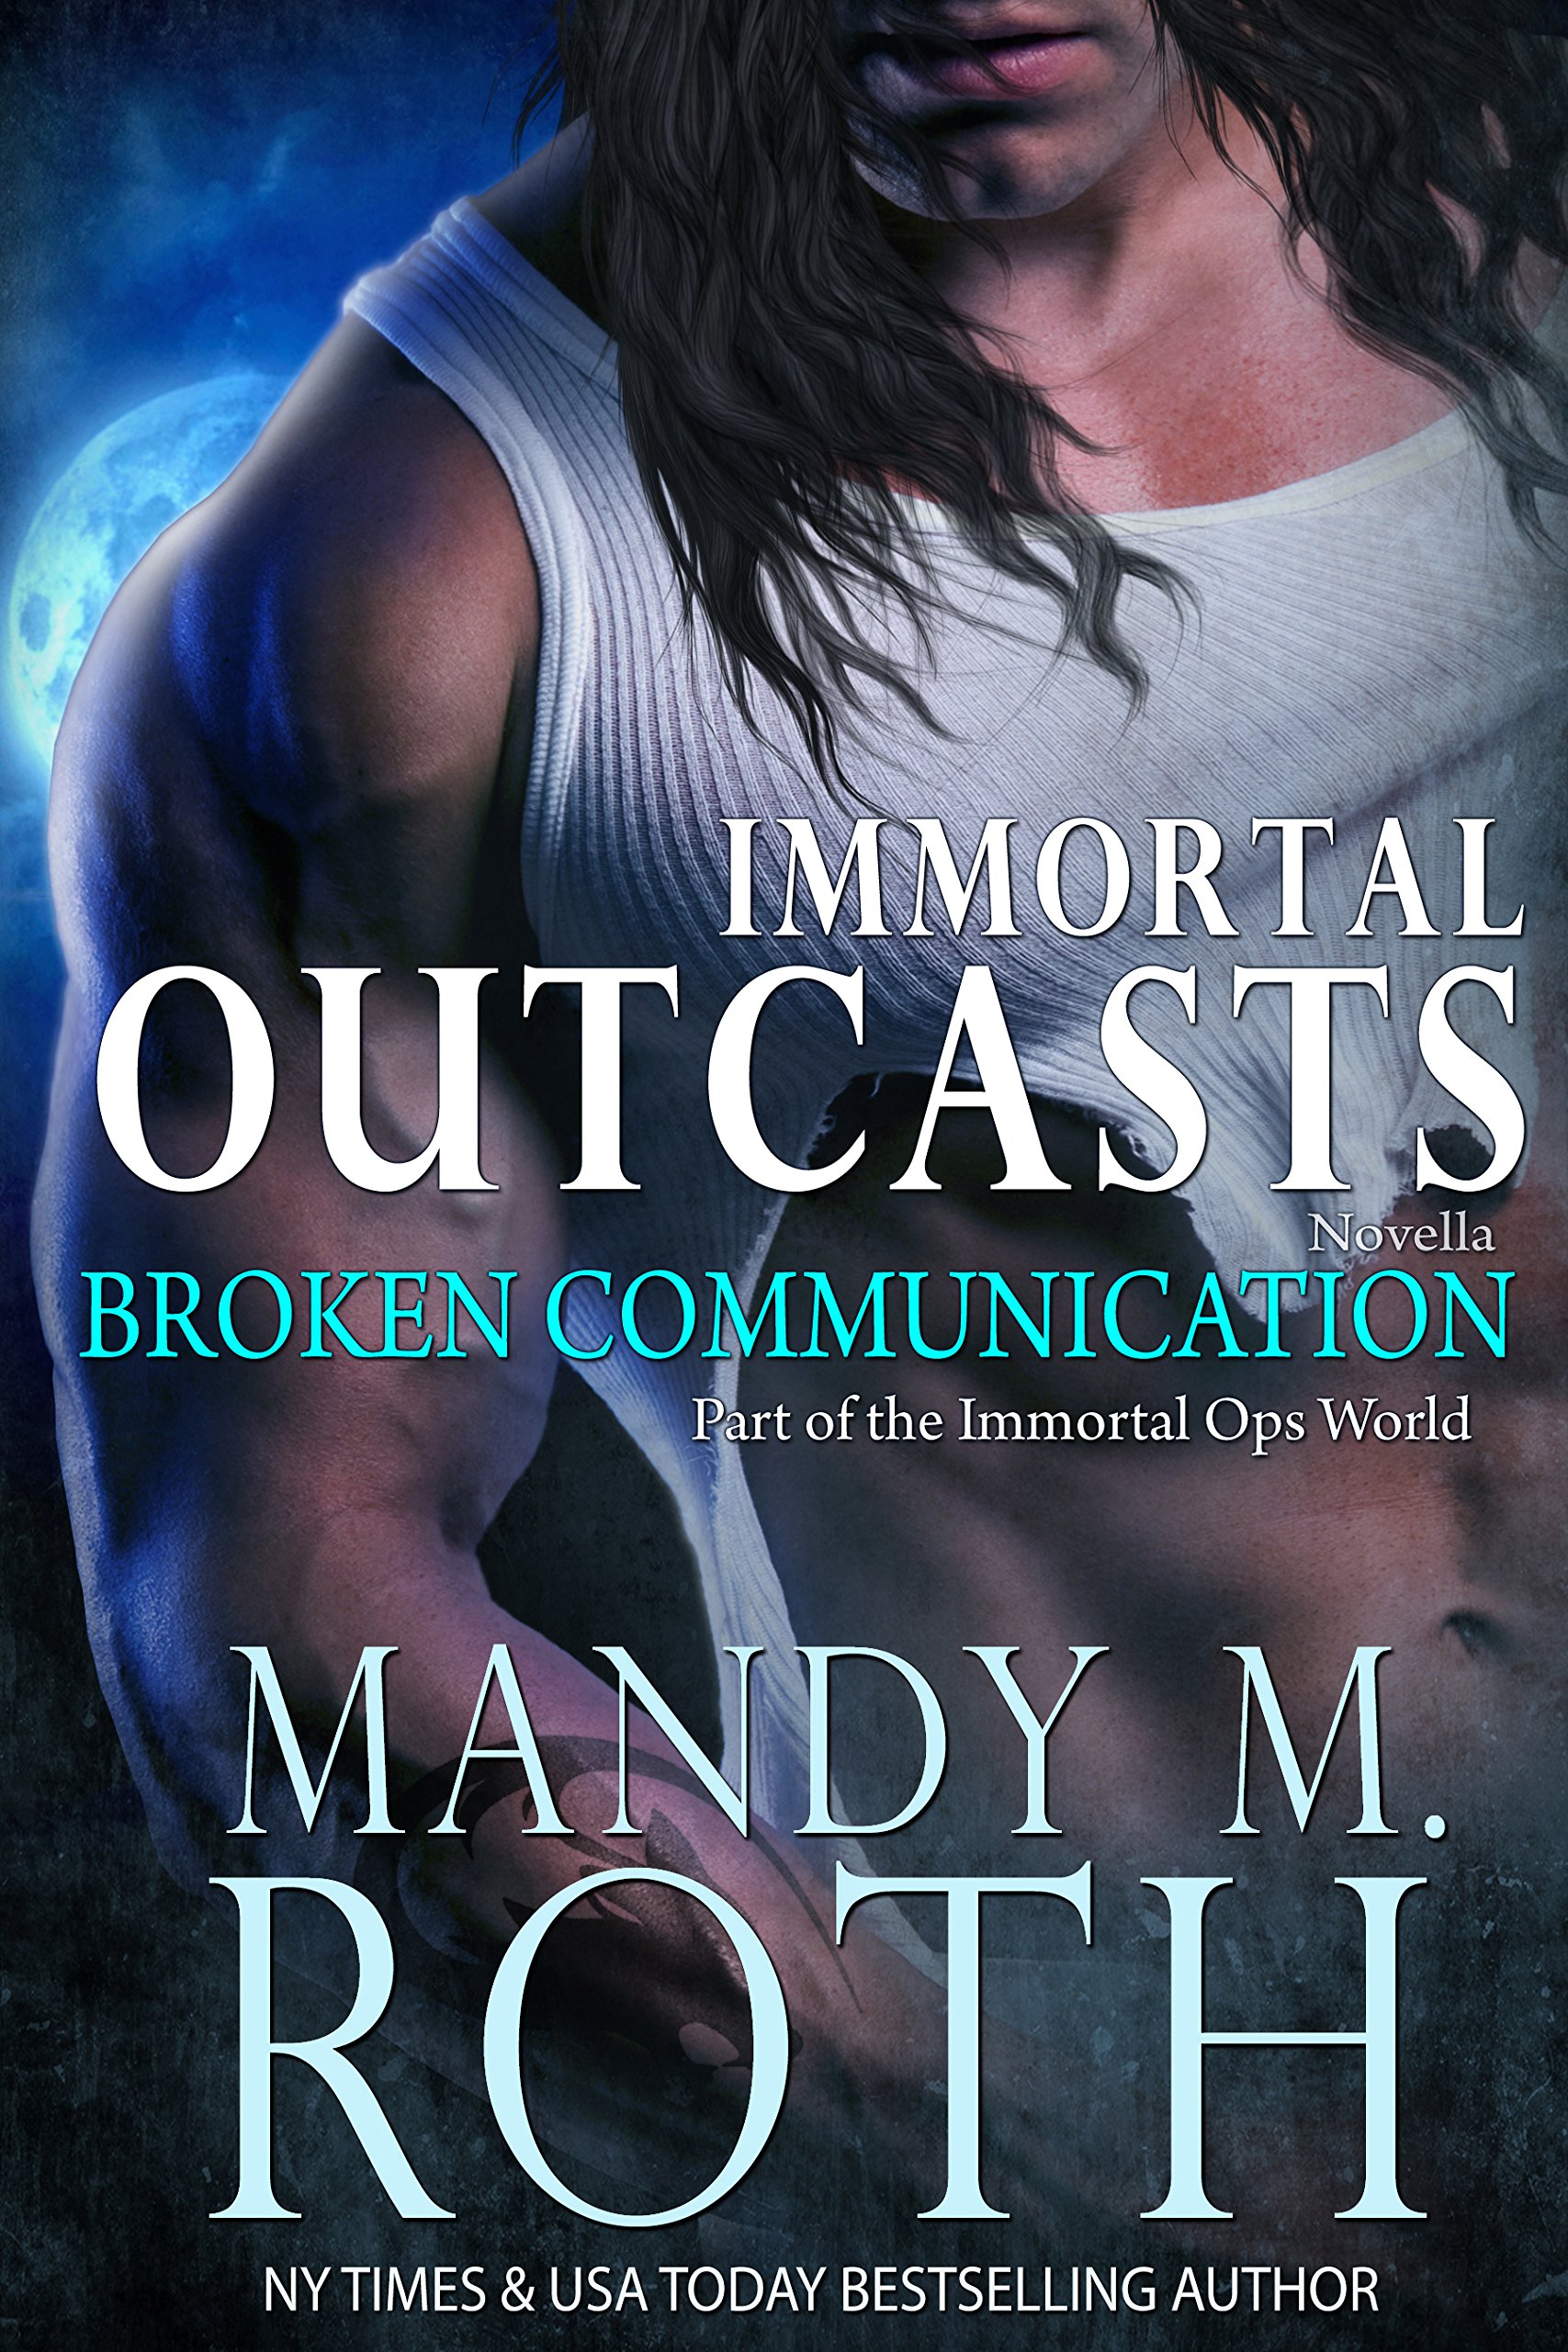 Book Cover Broken Communication (Immortal Outcasts Series Book 1)